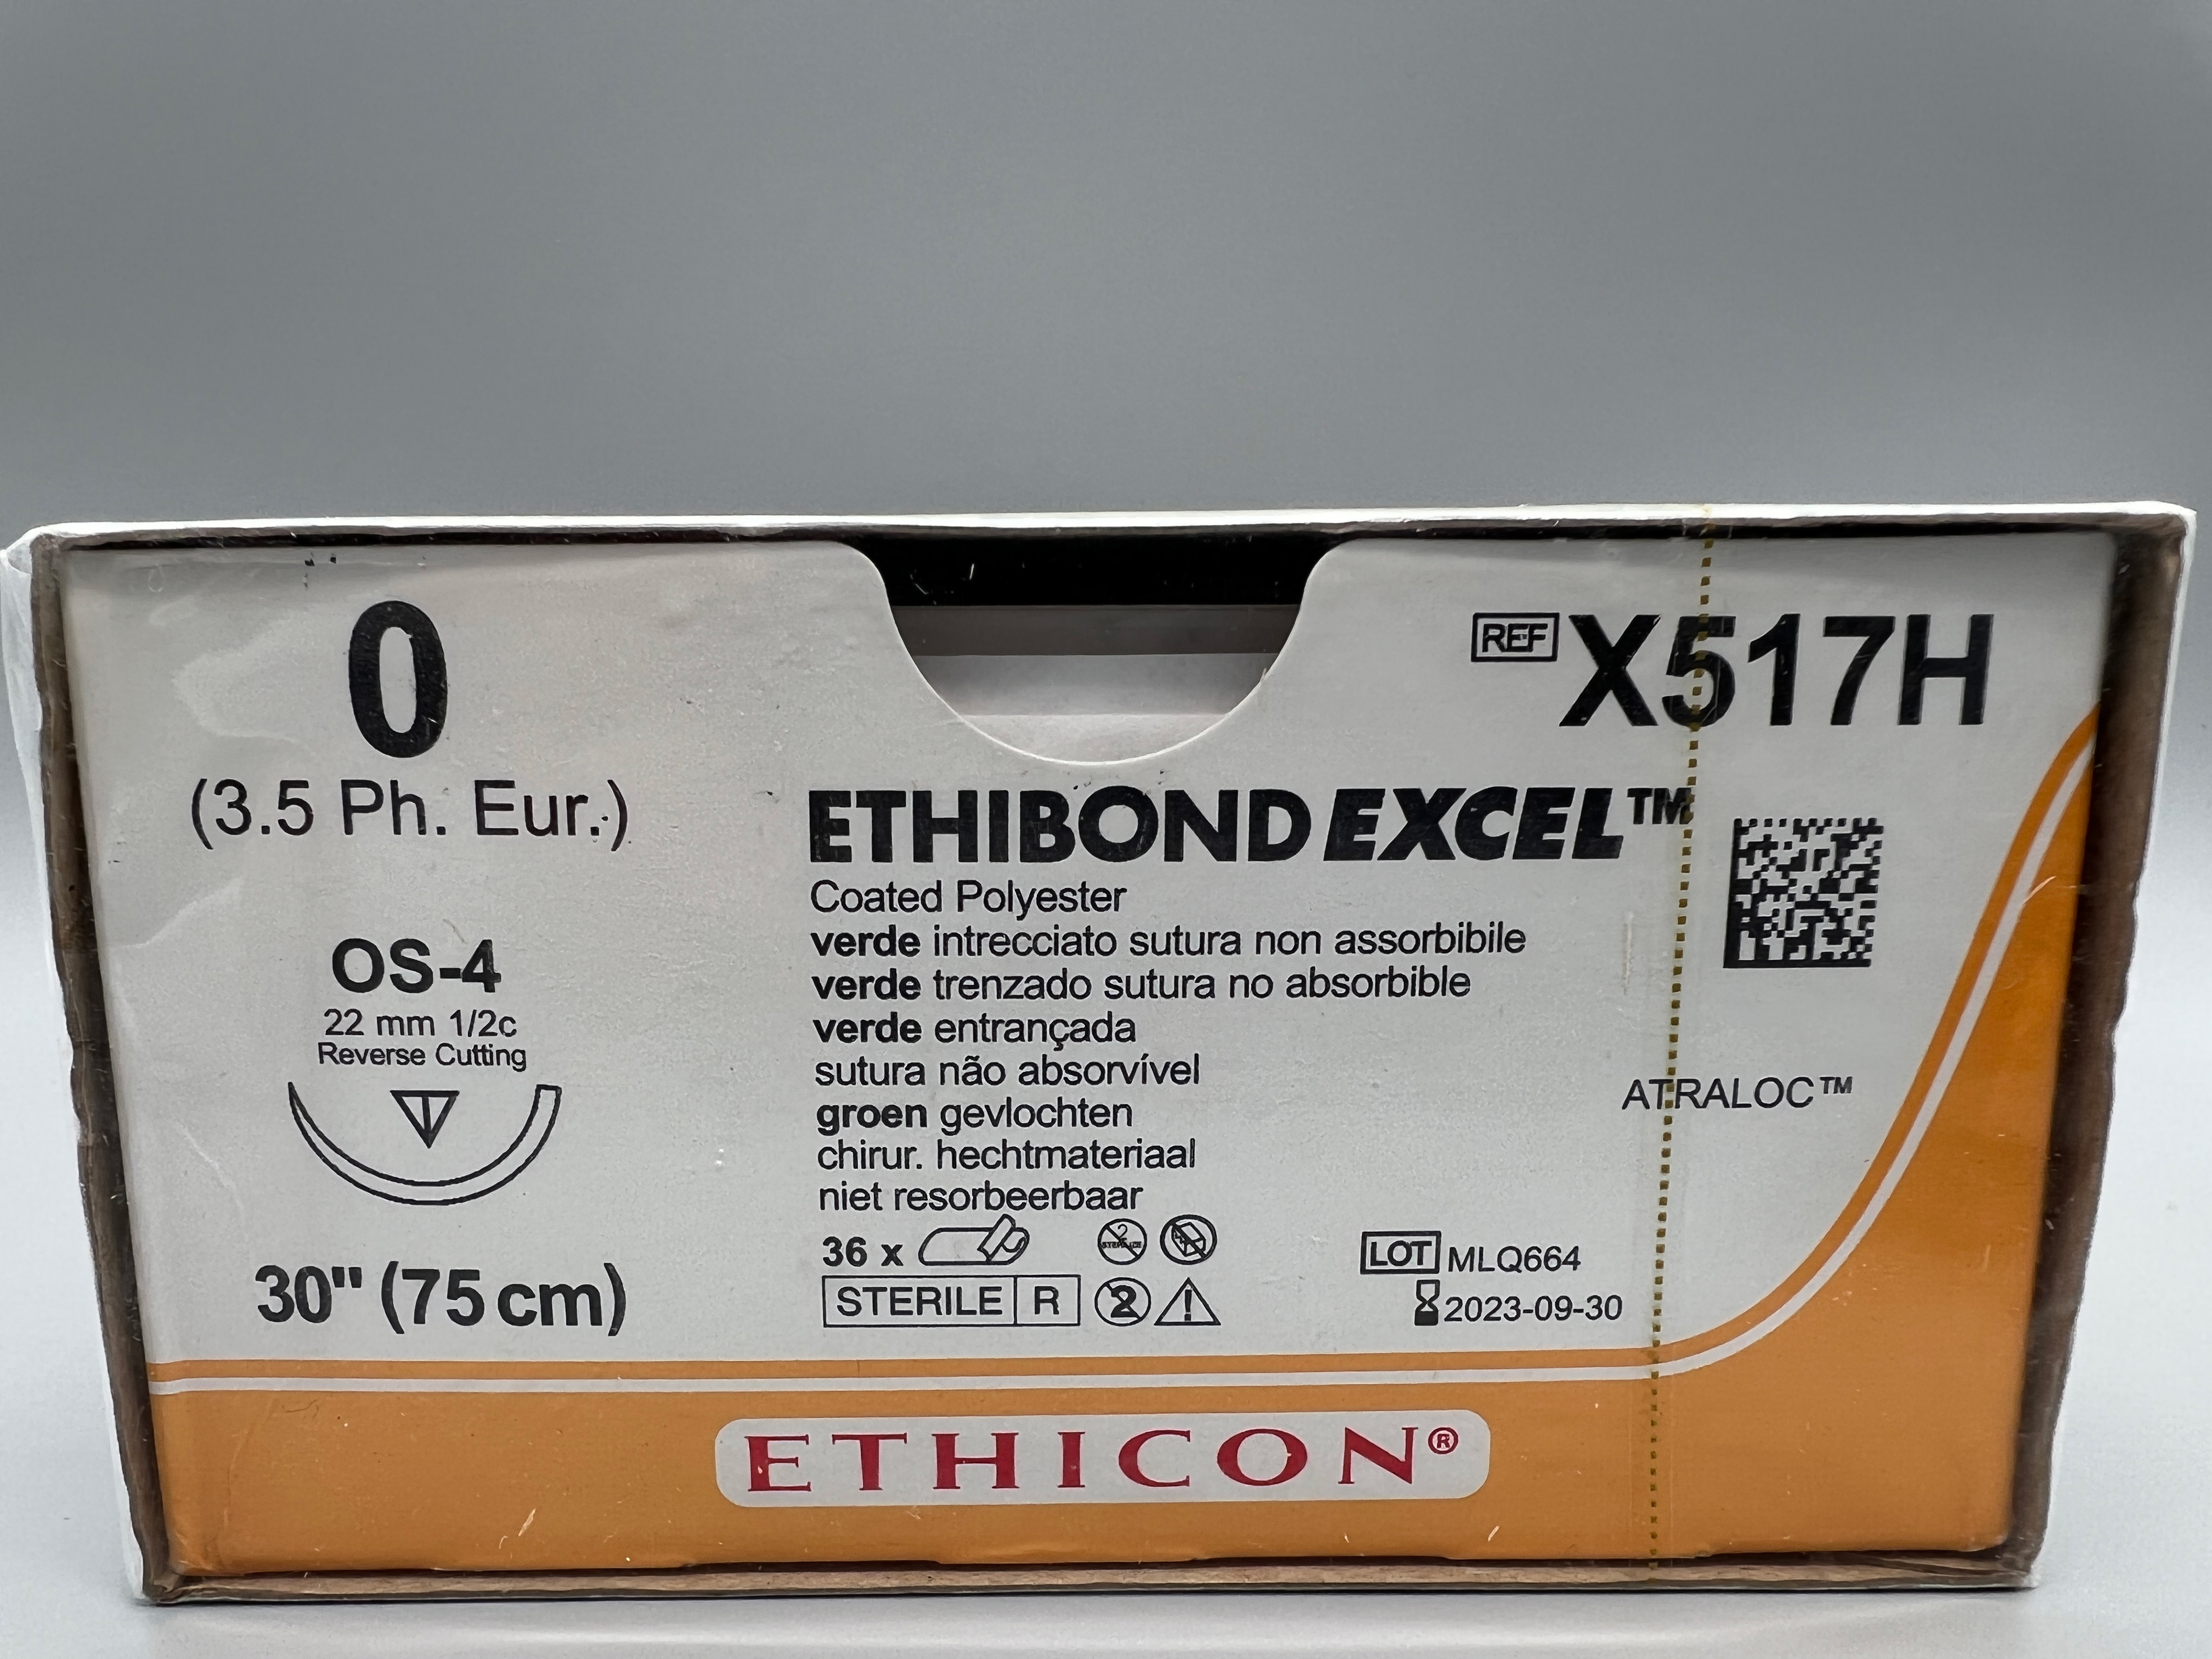 ETHIBOND EXCEL COATED POLYESTER GREEN BRAIDED NON-ABSORBABLE SUTURE OS-4 22MM 1/2C REVERSE CUTTING